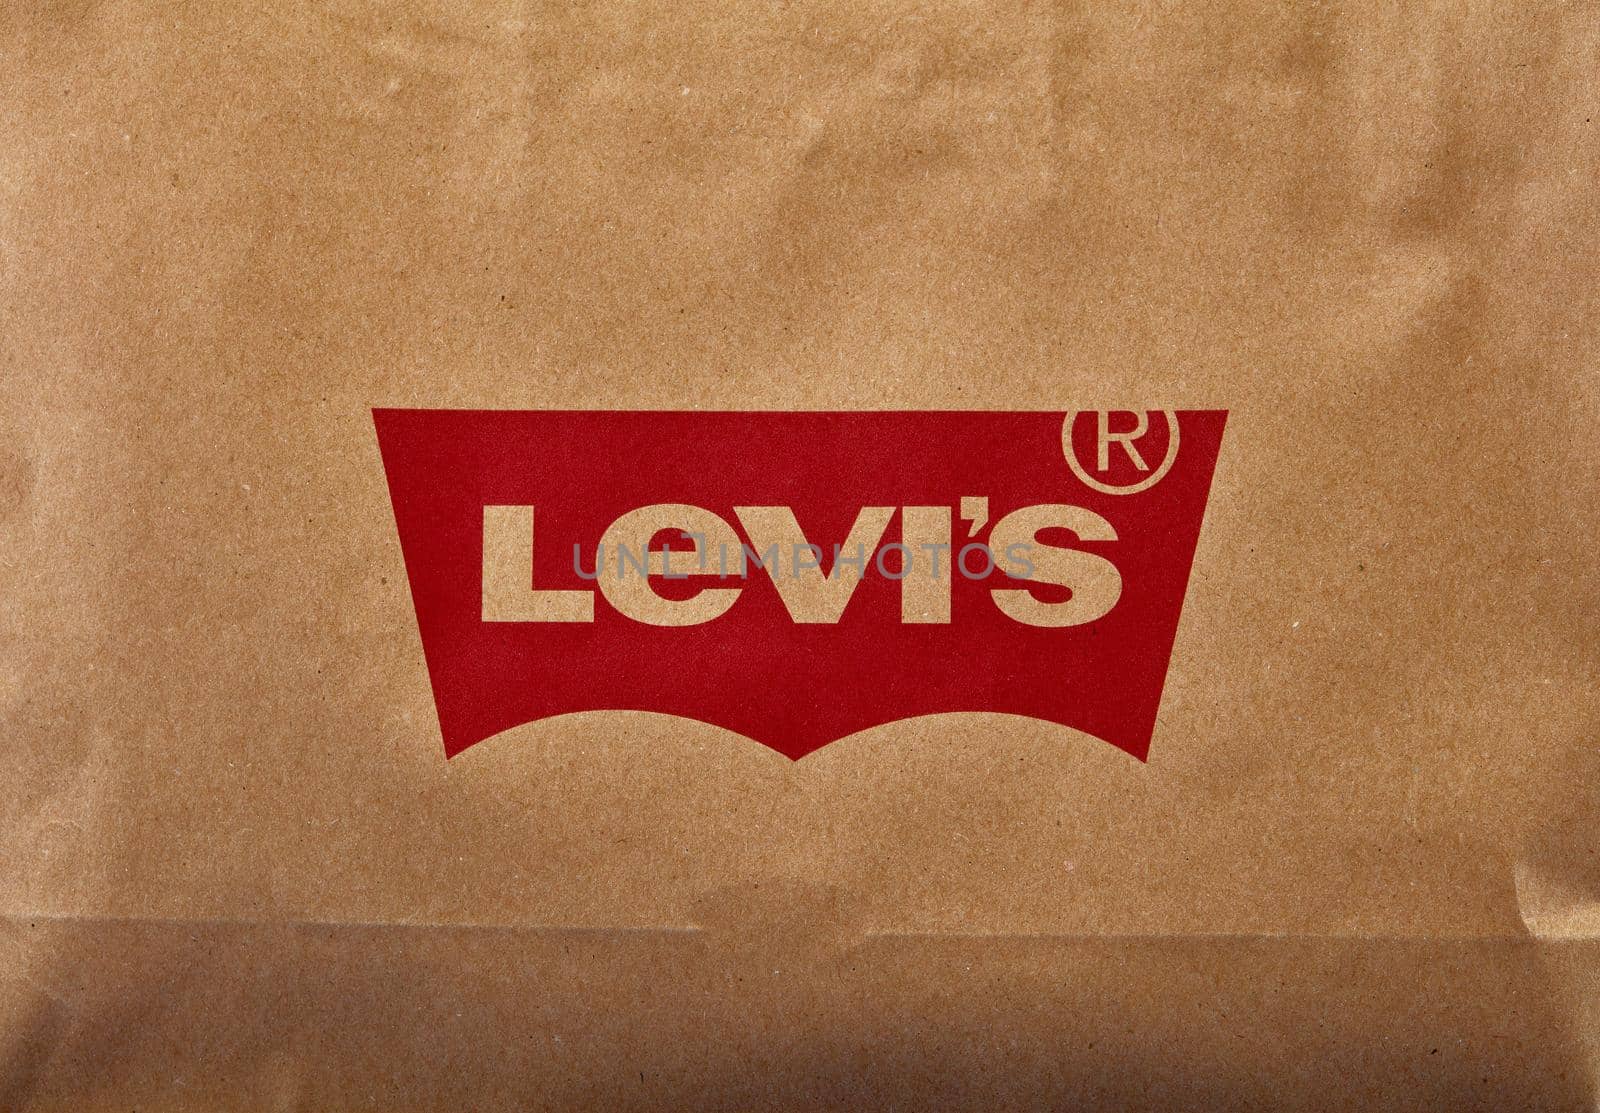 Levi's paper shopping bags. 26.03.2020, Russia. by EvgeniyQW